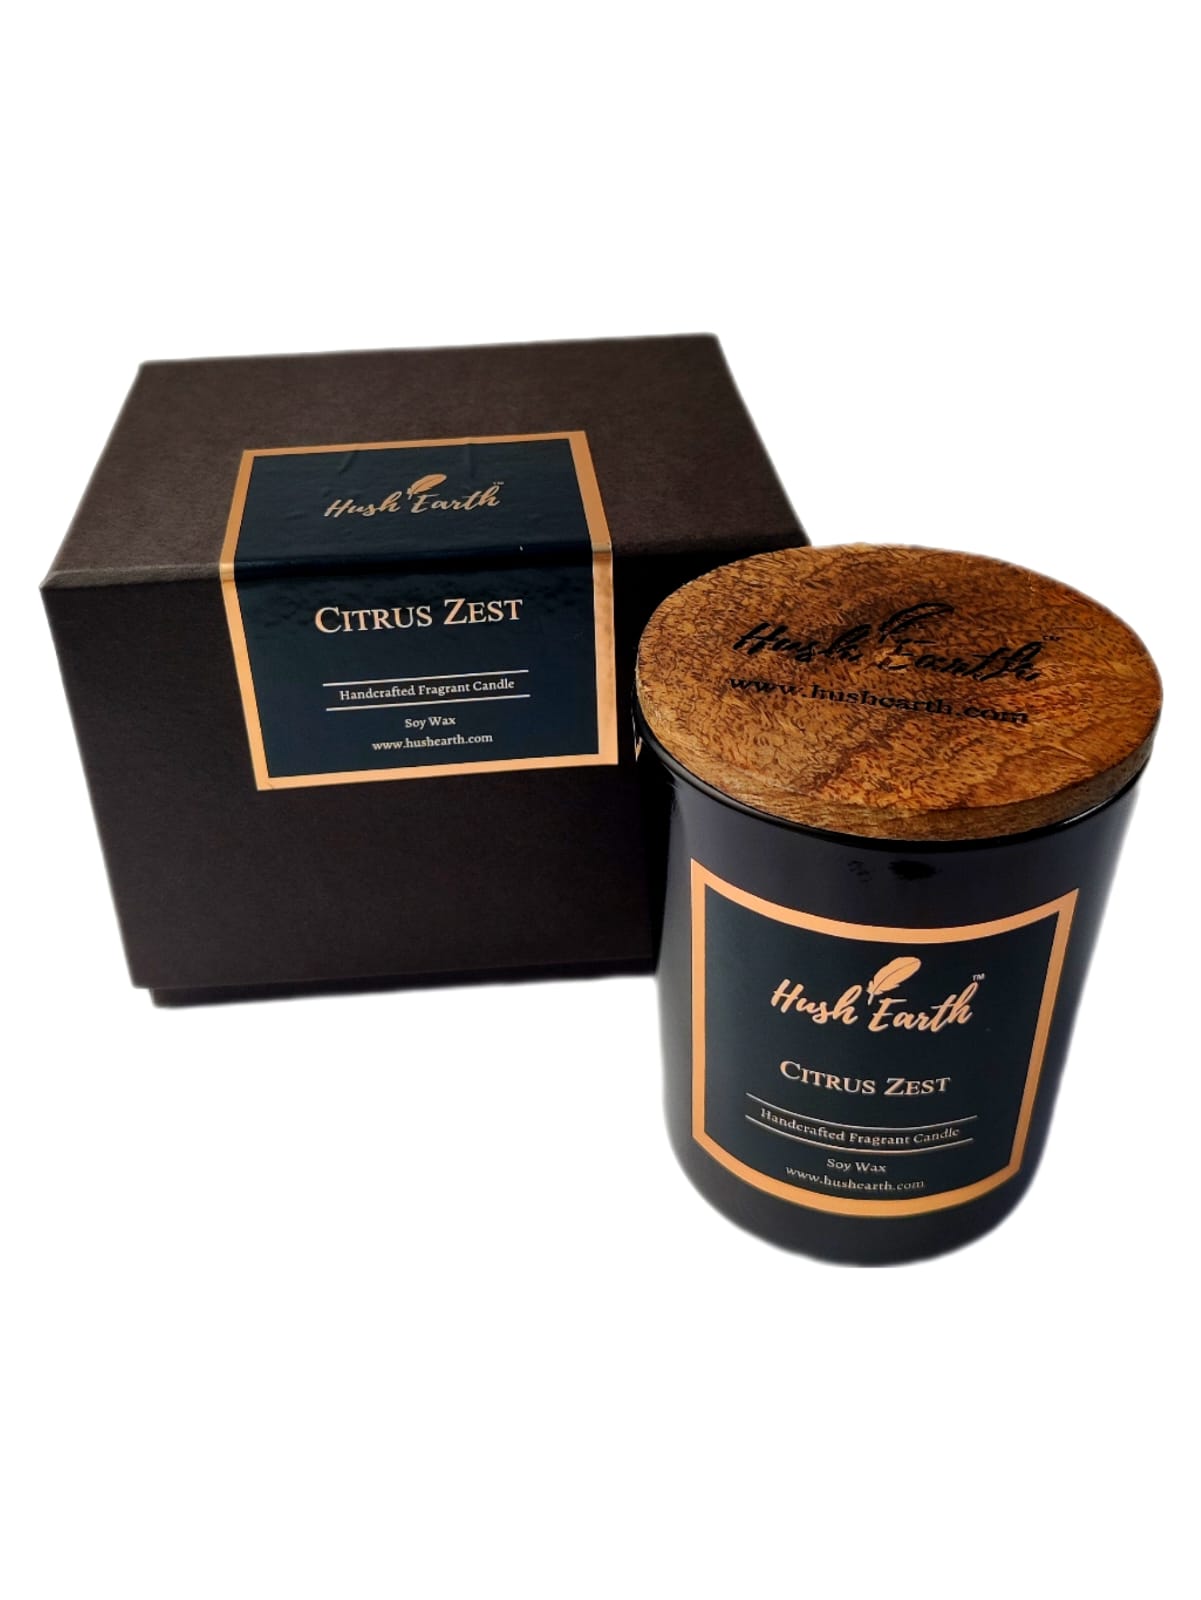 Citrus Zest - Hush Earth Handcrafted Single Wick Candle